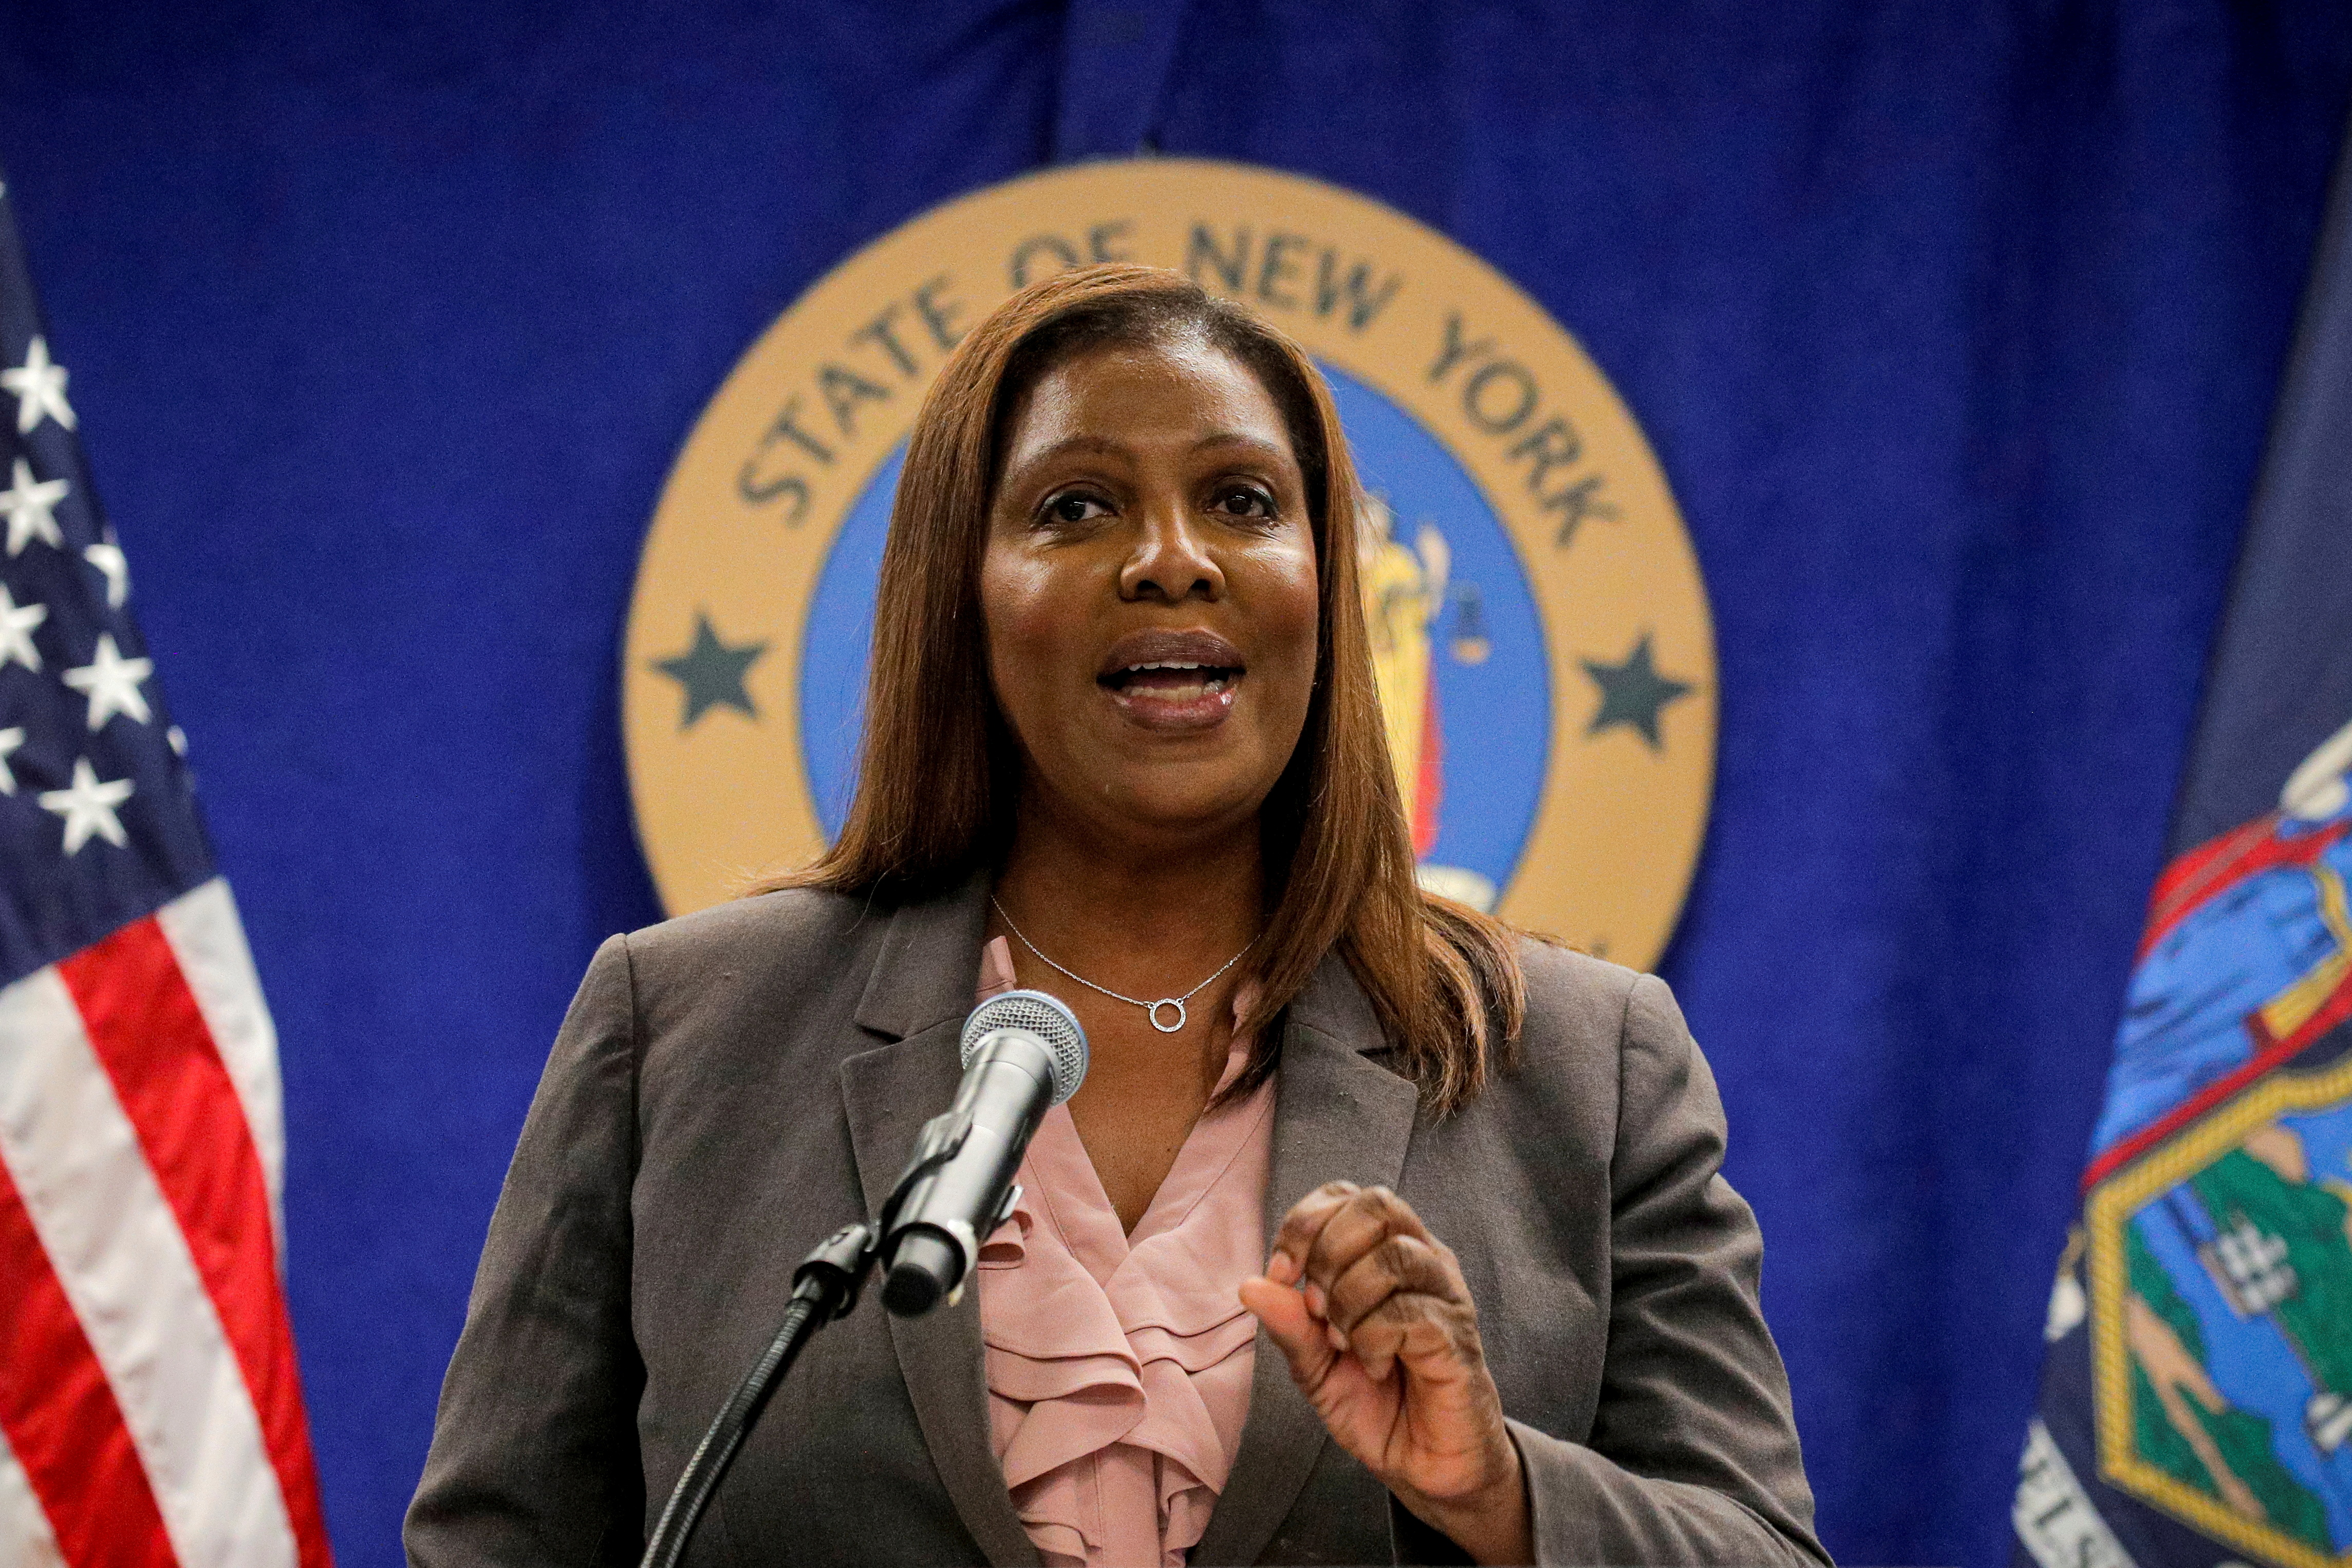 New York State Attorney General, Letitia James, speaks during a news conference, to announce criminal justice reform in New York